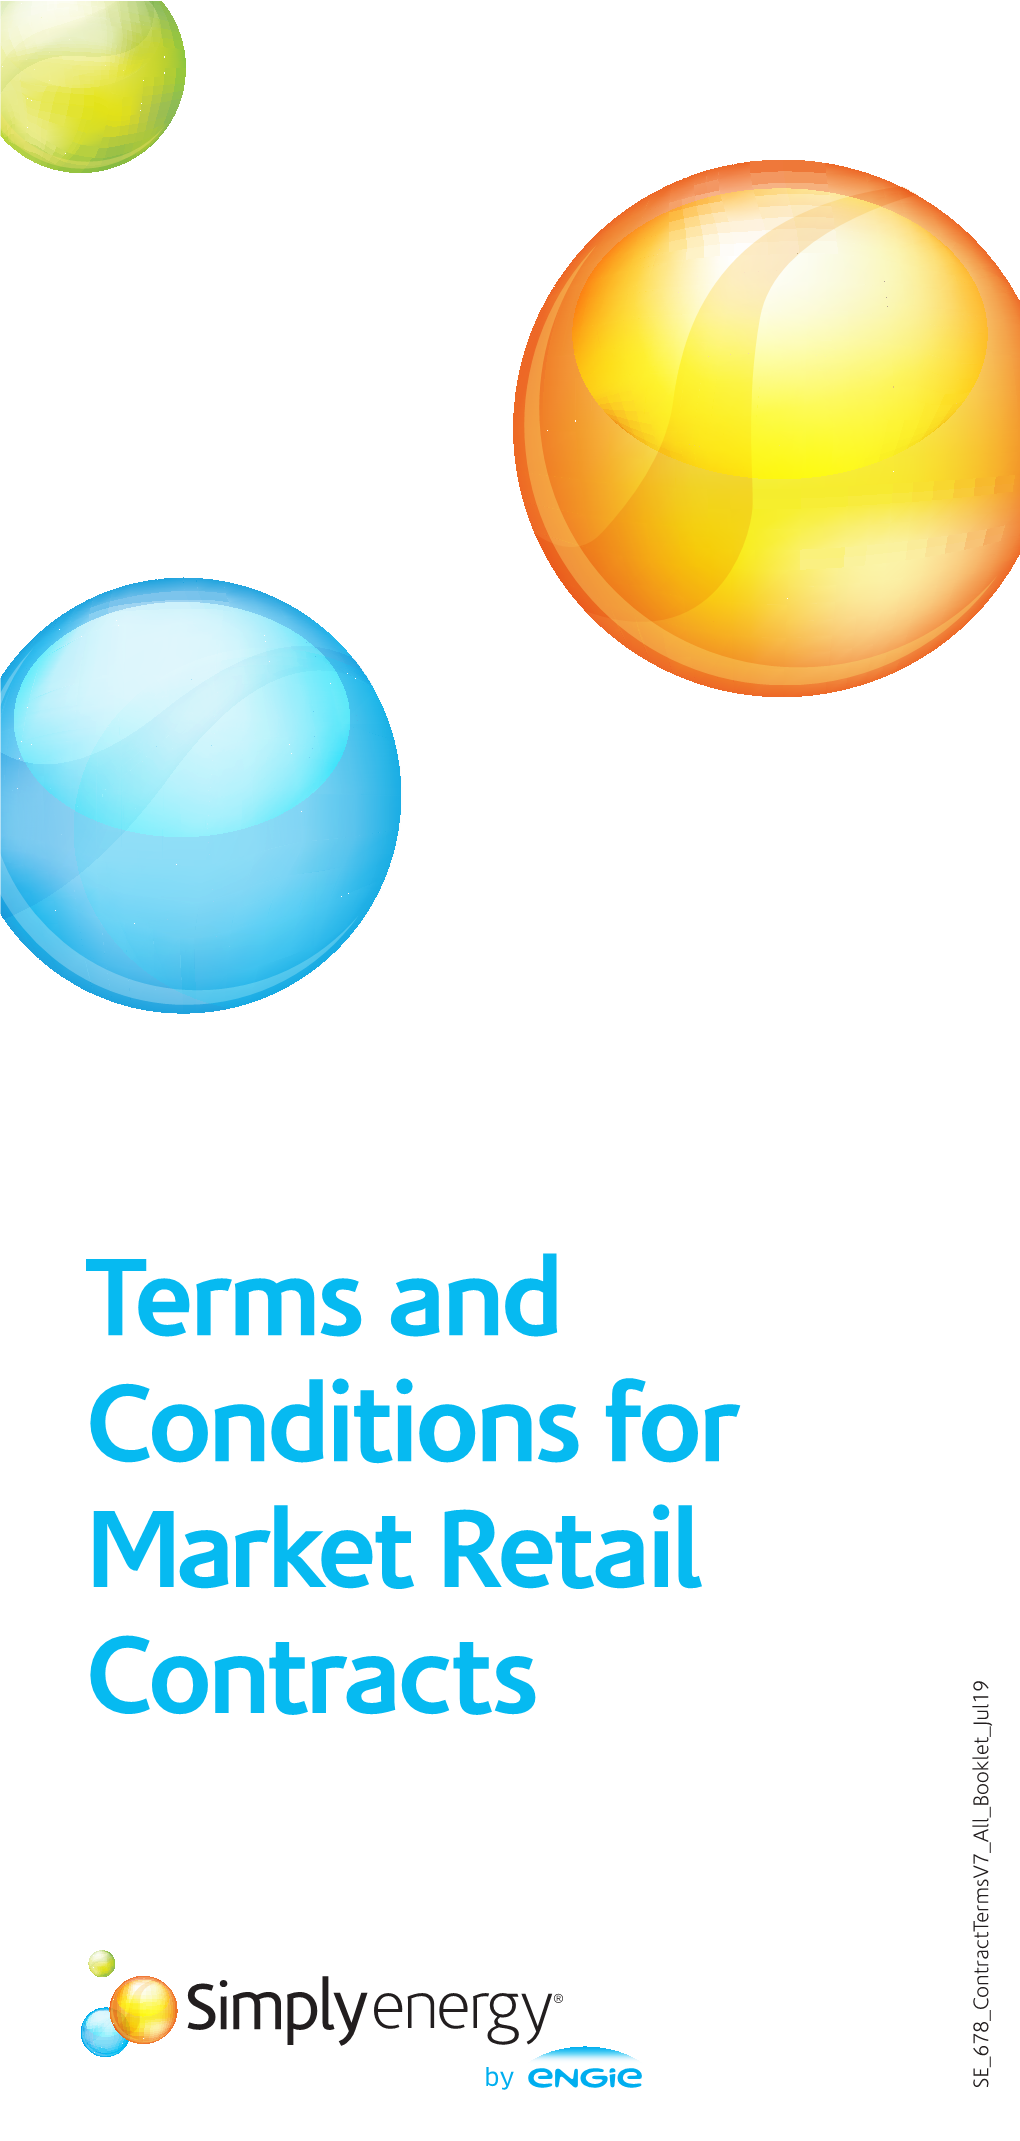 Terms and Conditions for Market Retail Contracts